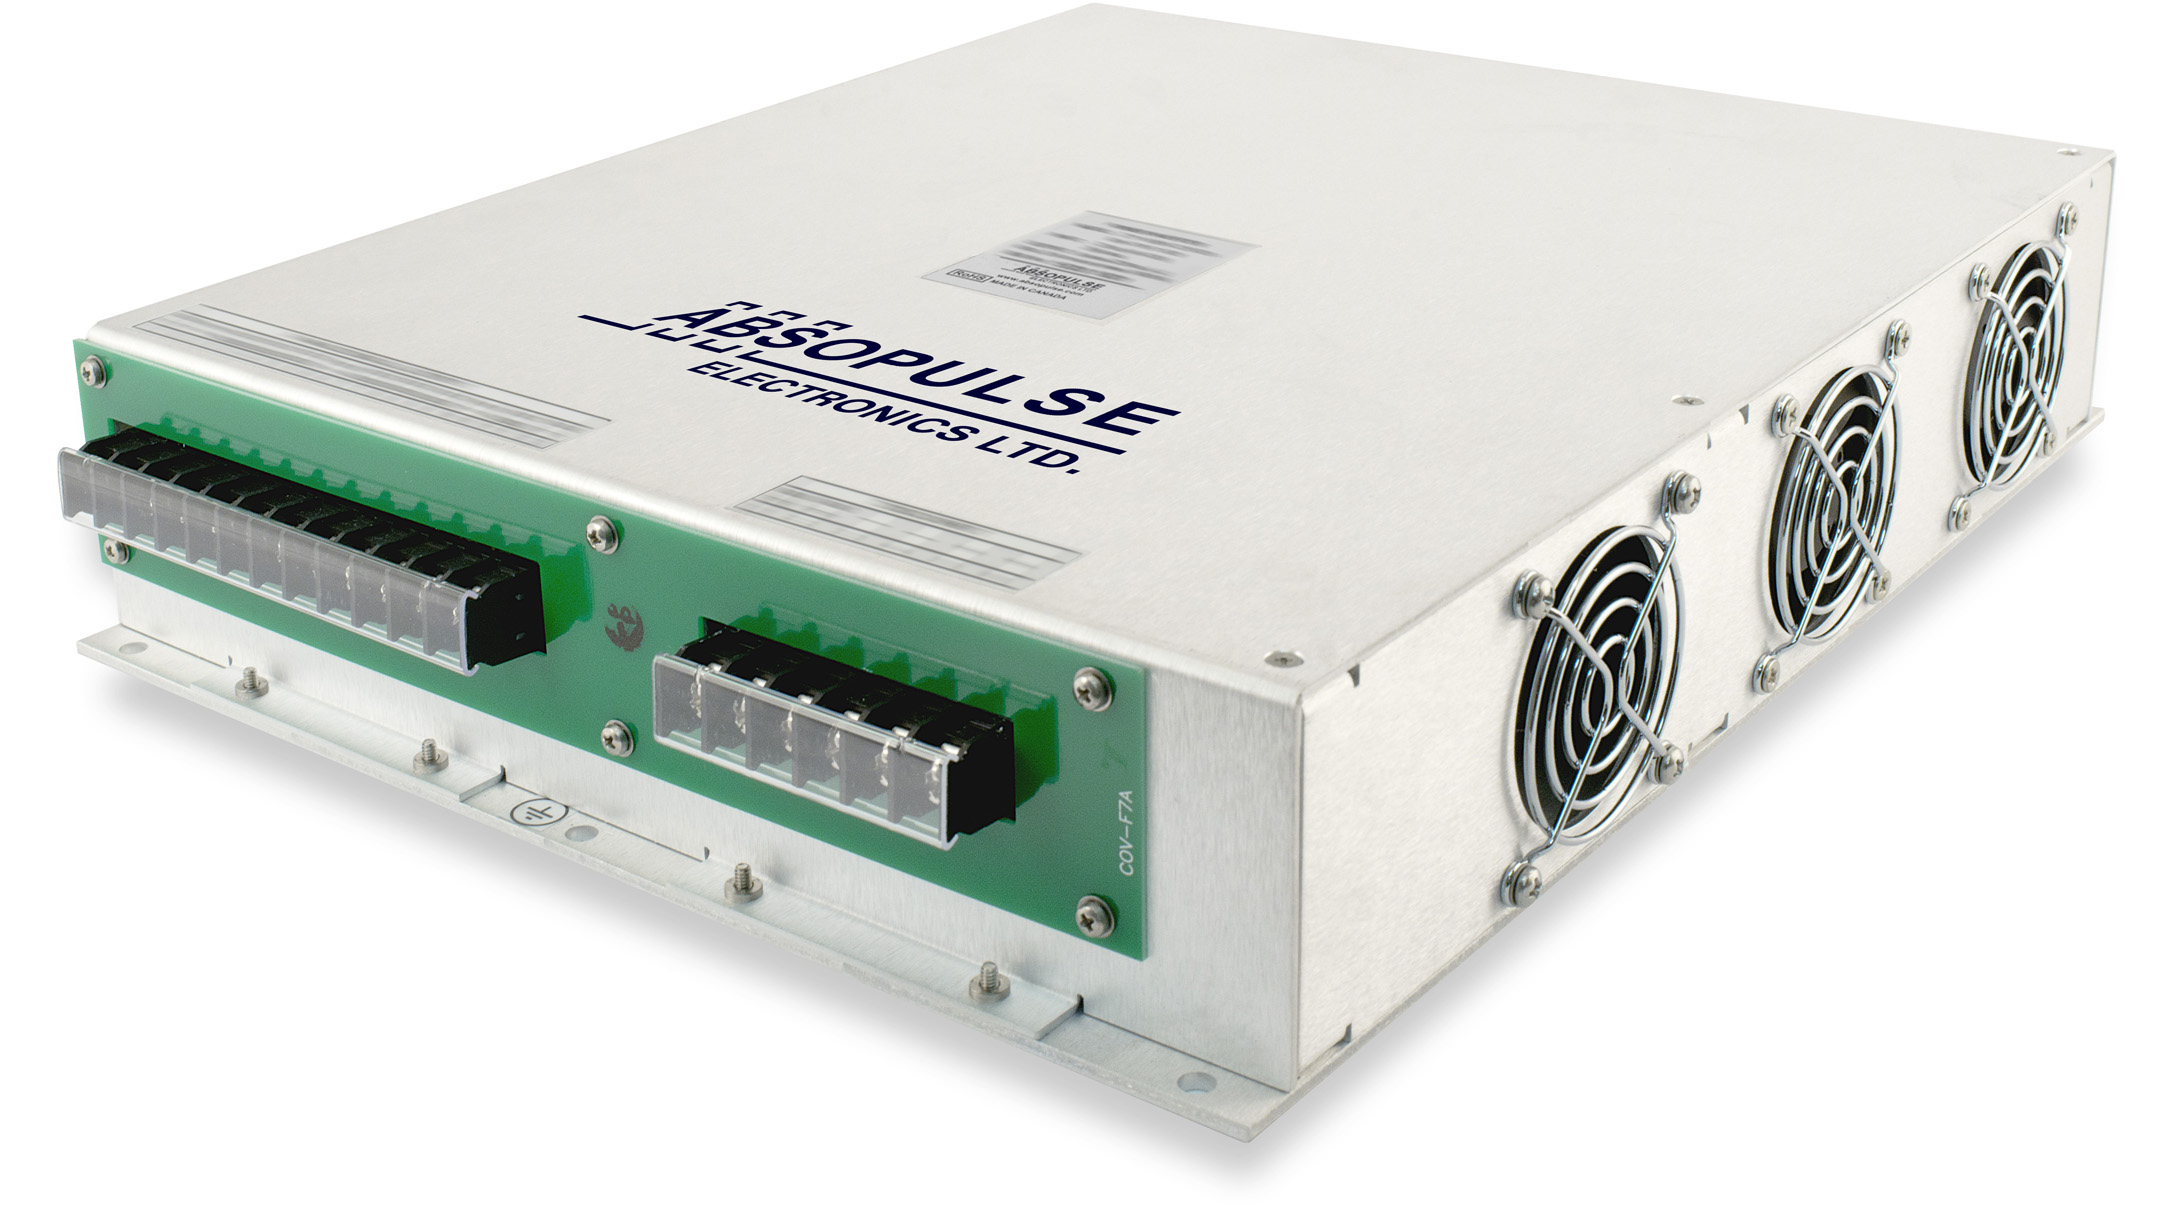 Split-Phase AC-Output Frequency Converters Deliver 1kVA